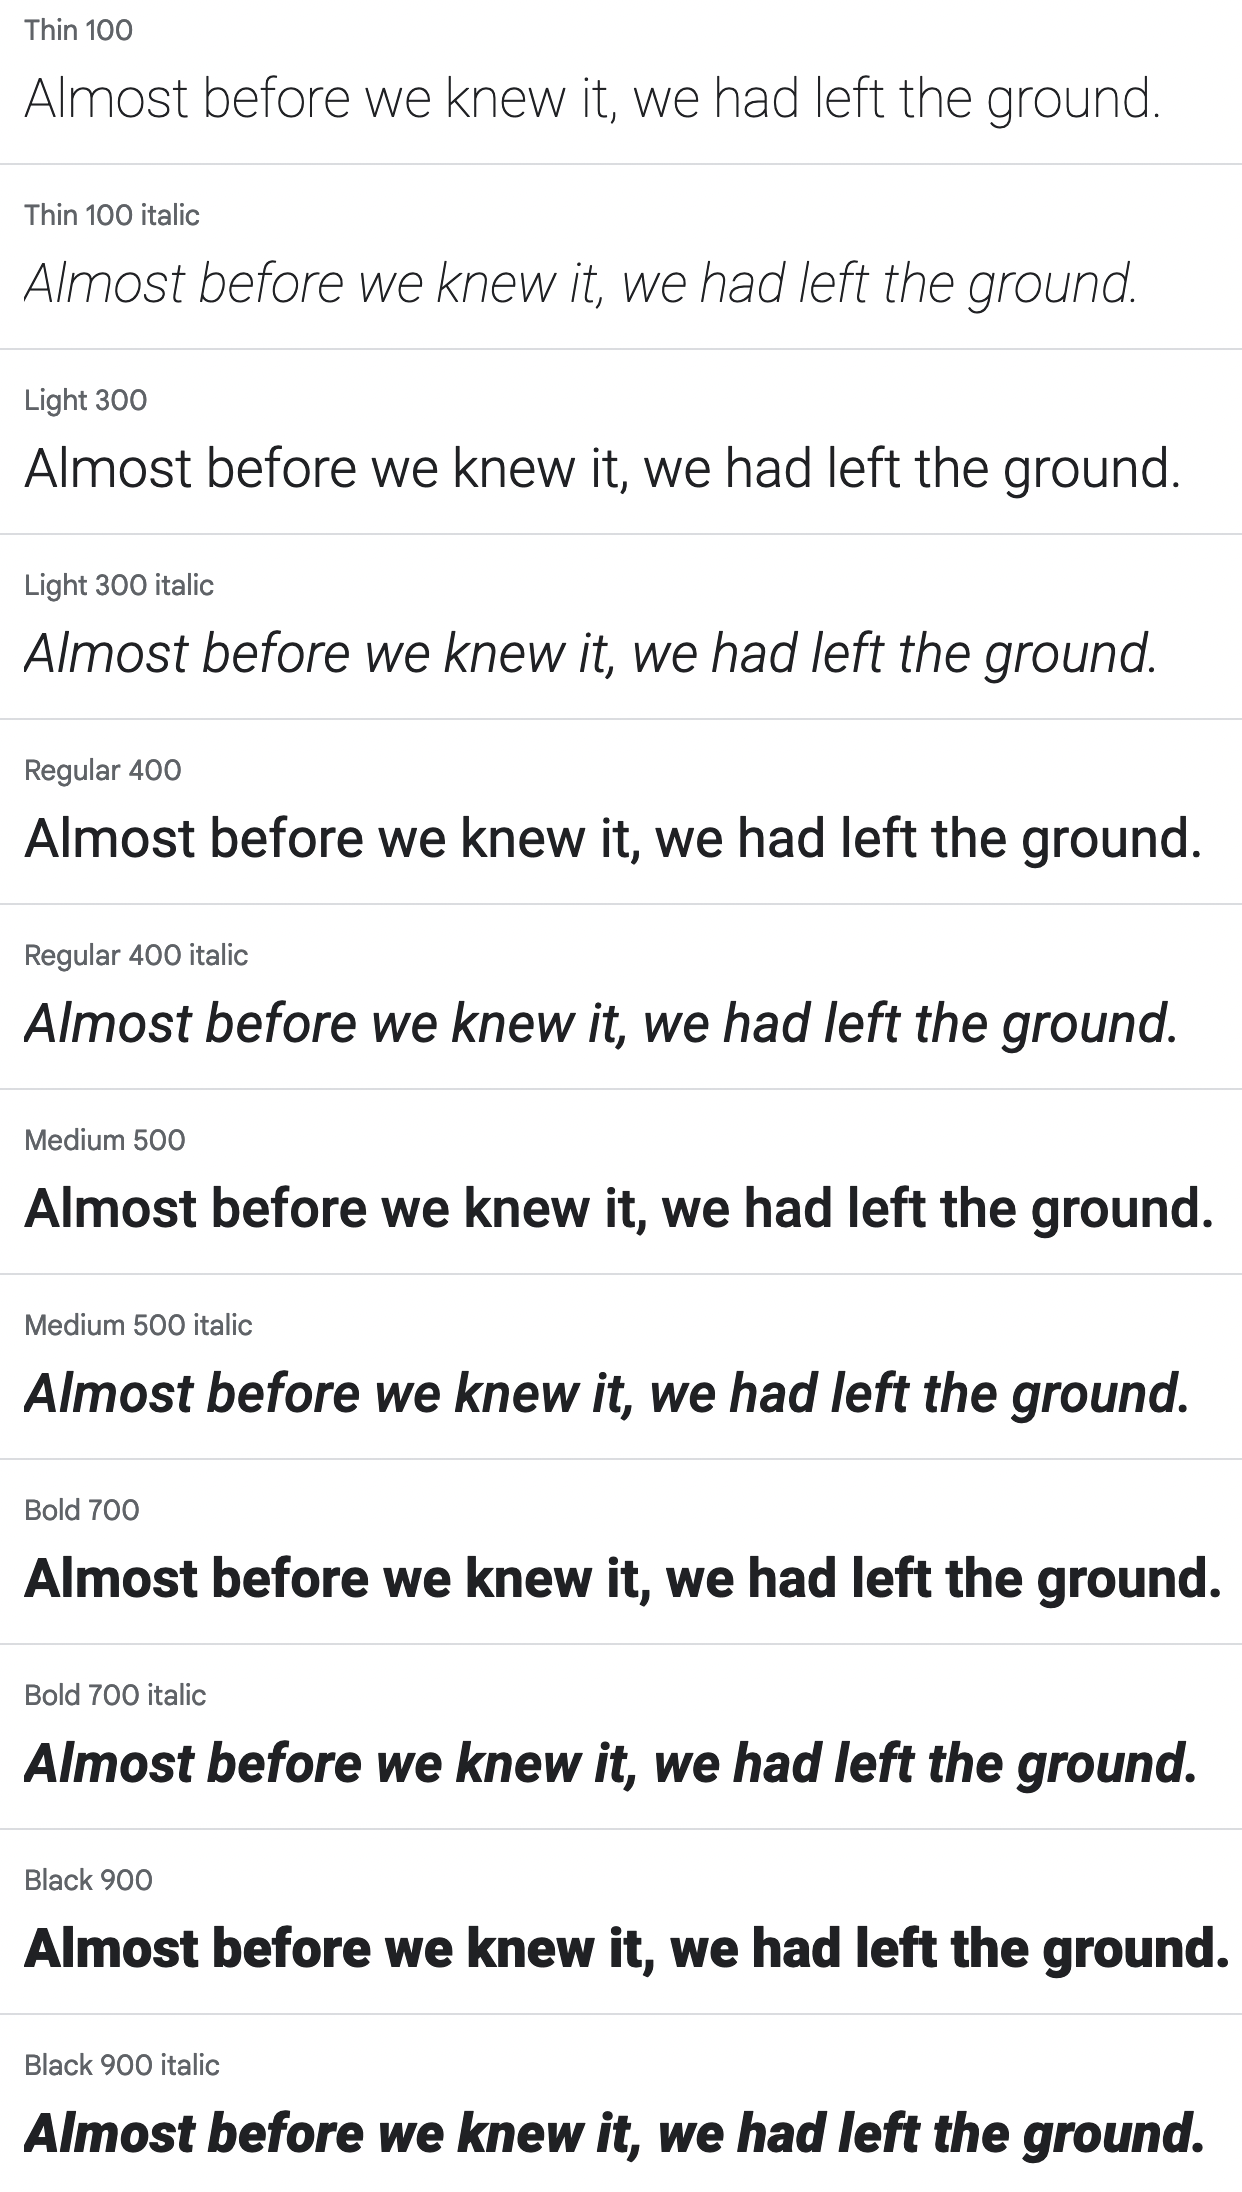 The text "Almost before we knew it, we had left the ground" in the Roboto font with increasing font weights